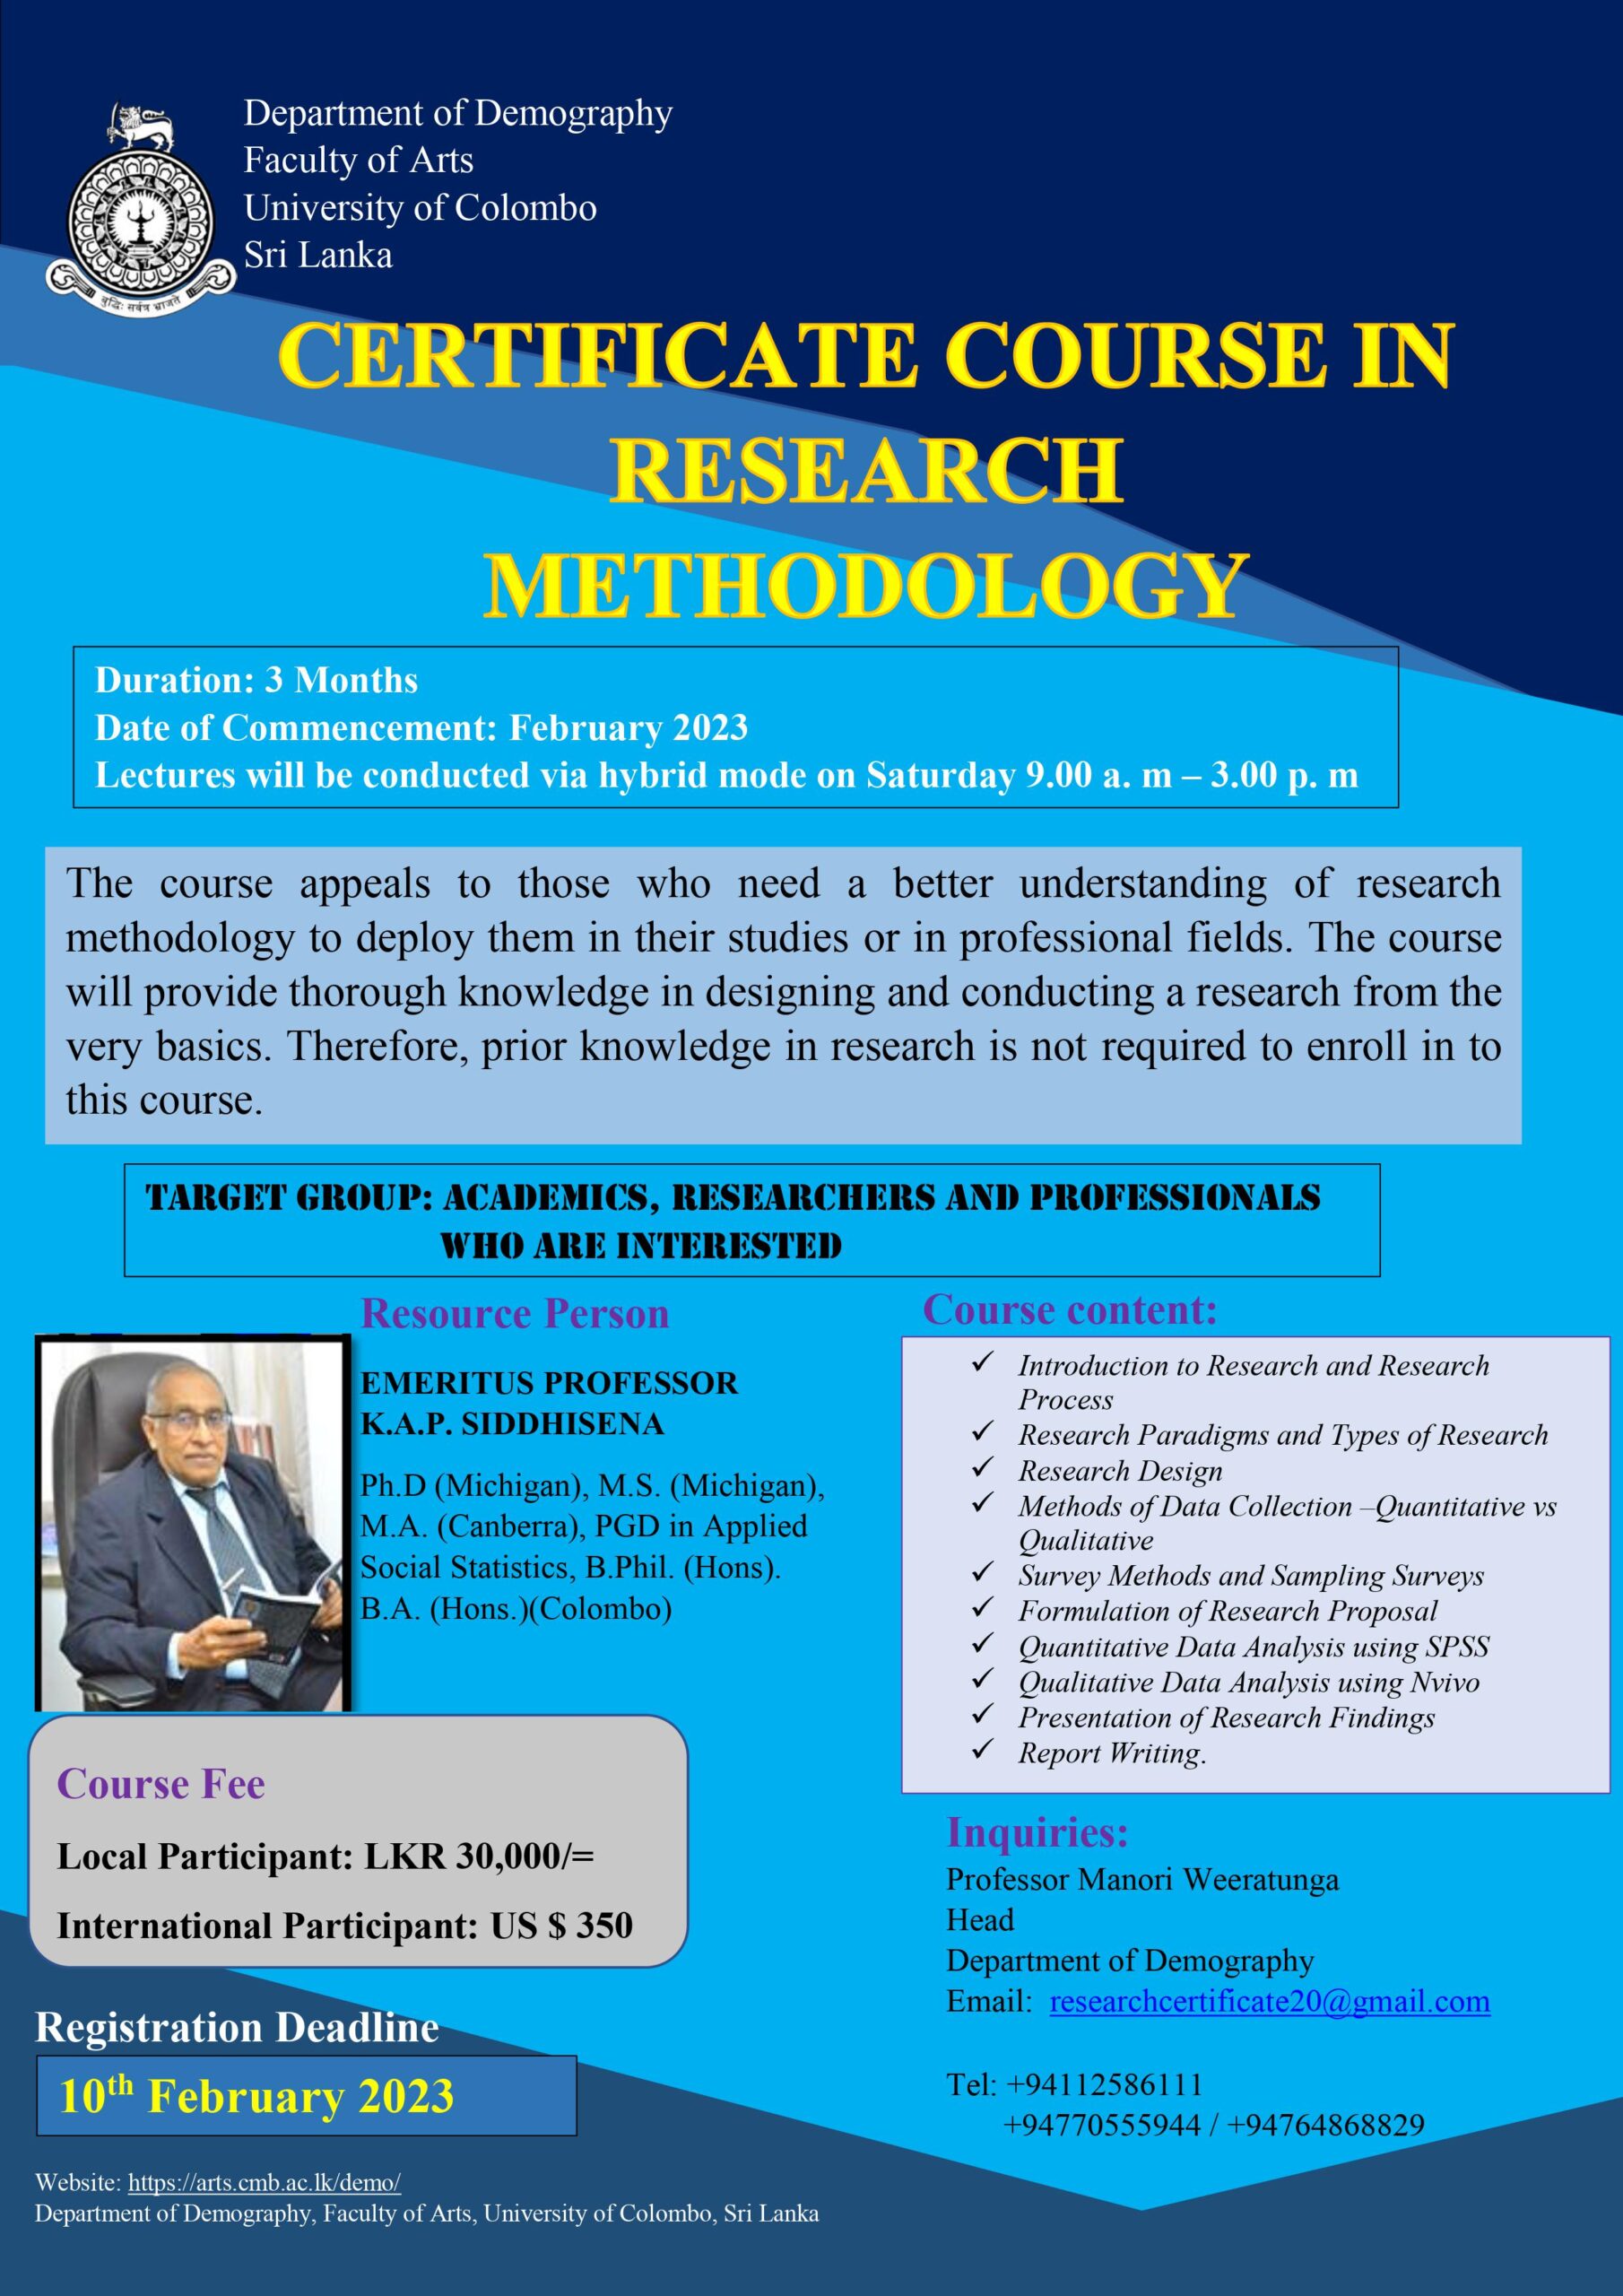 Call for application for the Certificate Course in Research Methodology- 2023